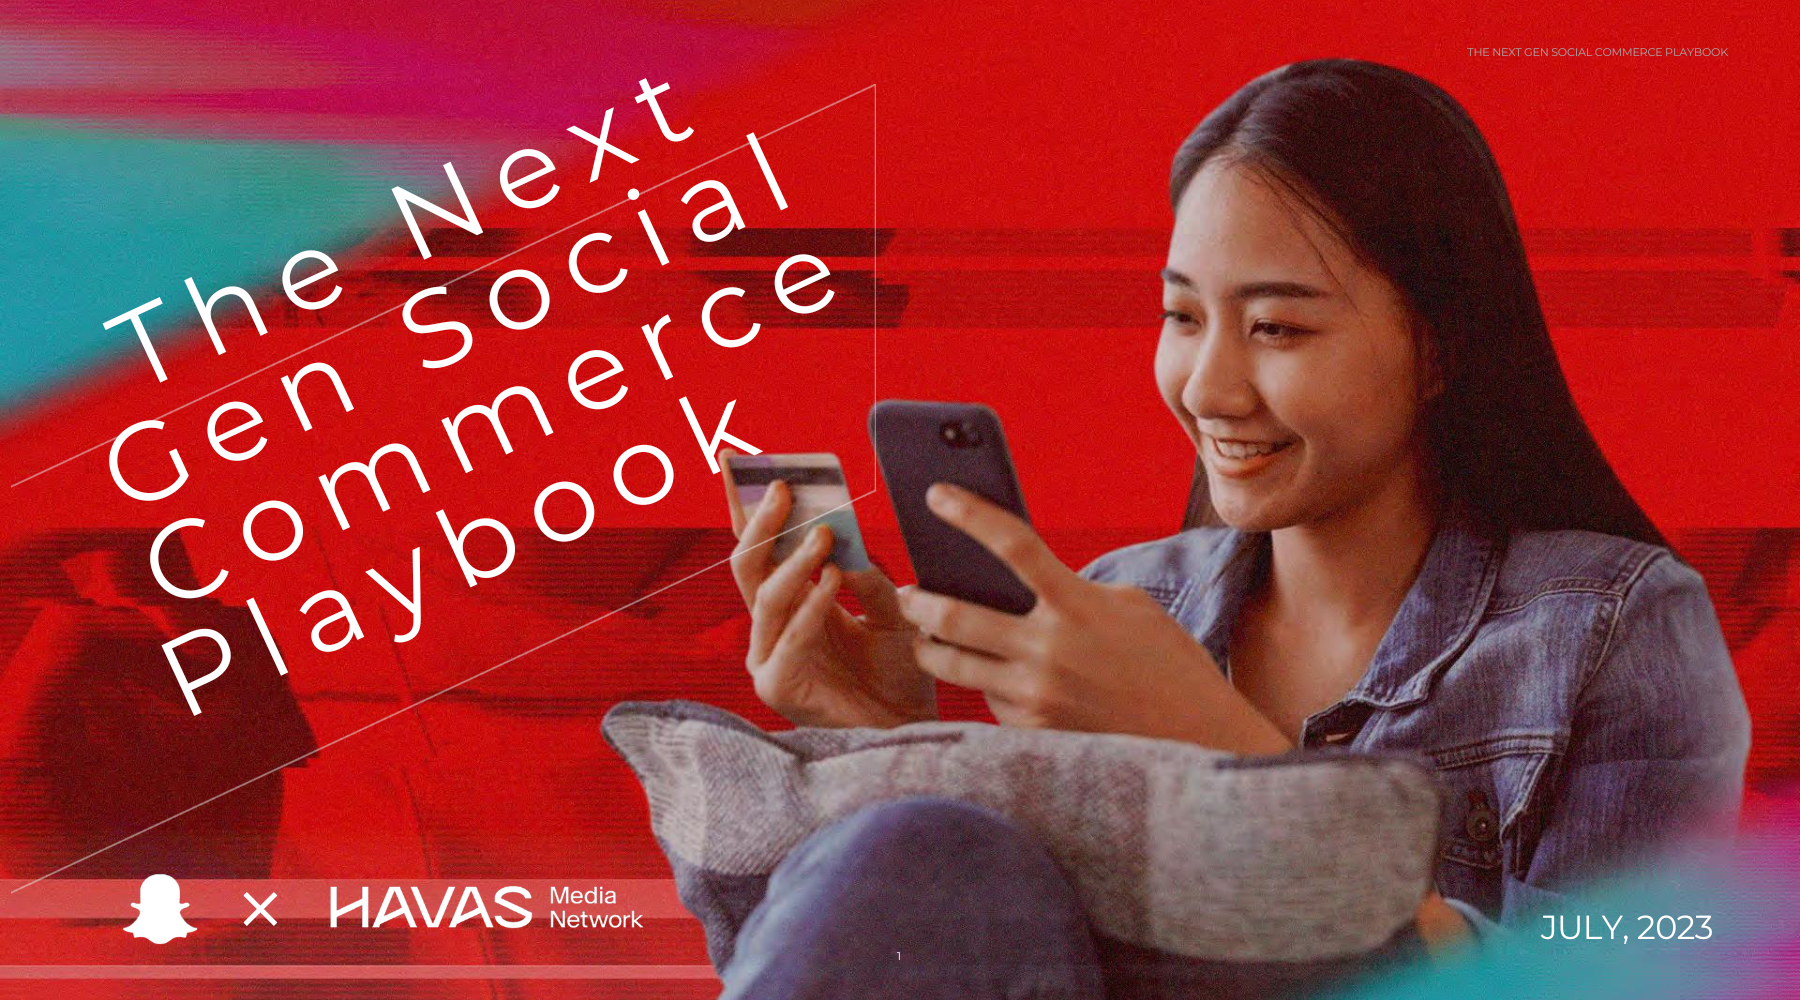 Snap Inc. and Havas Media Network Reveal How Brands can Engage Younger Shoppers in New Social Commerce Playbook